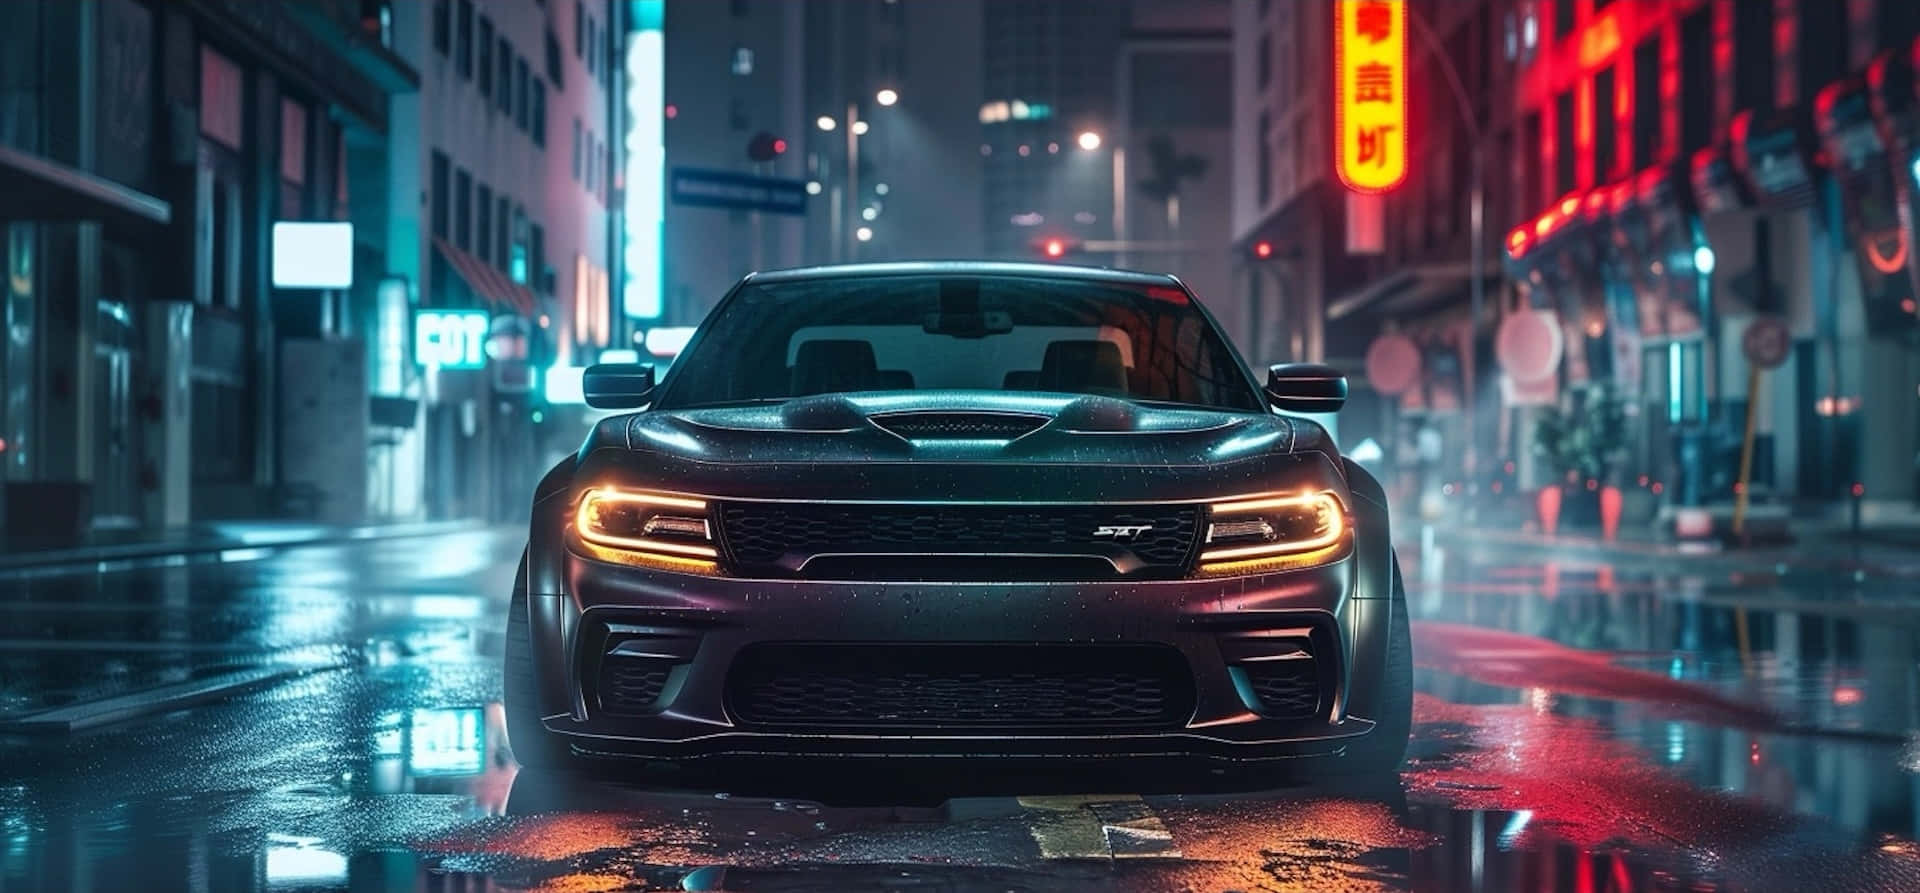 Dodge Charger Hellcat Night Cityscape Wallpaper